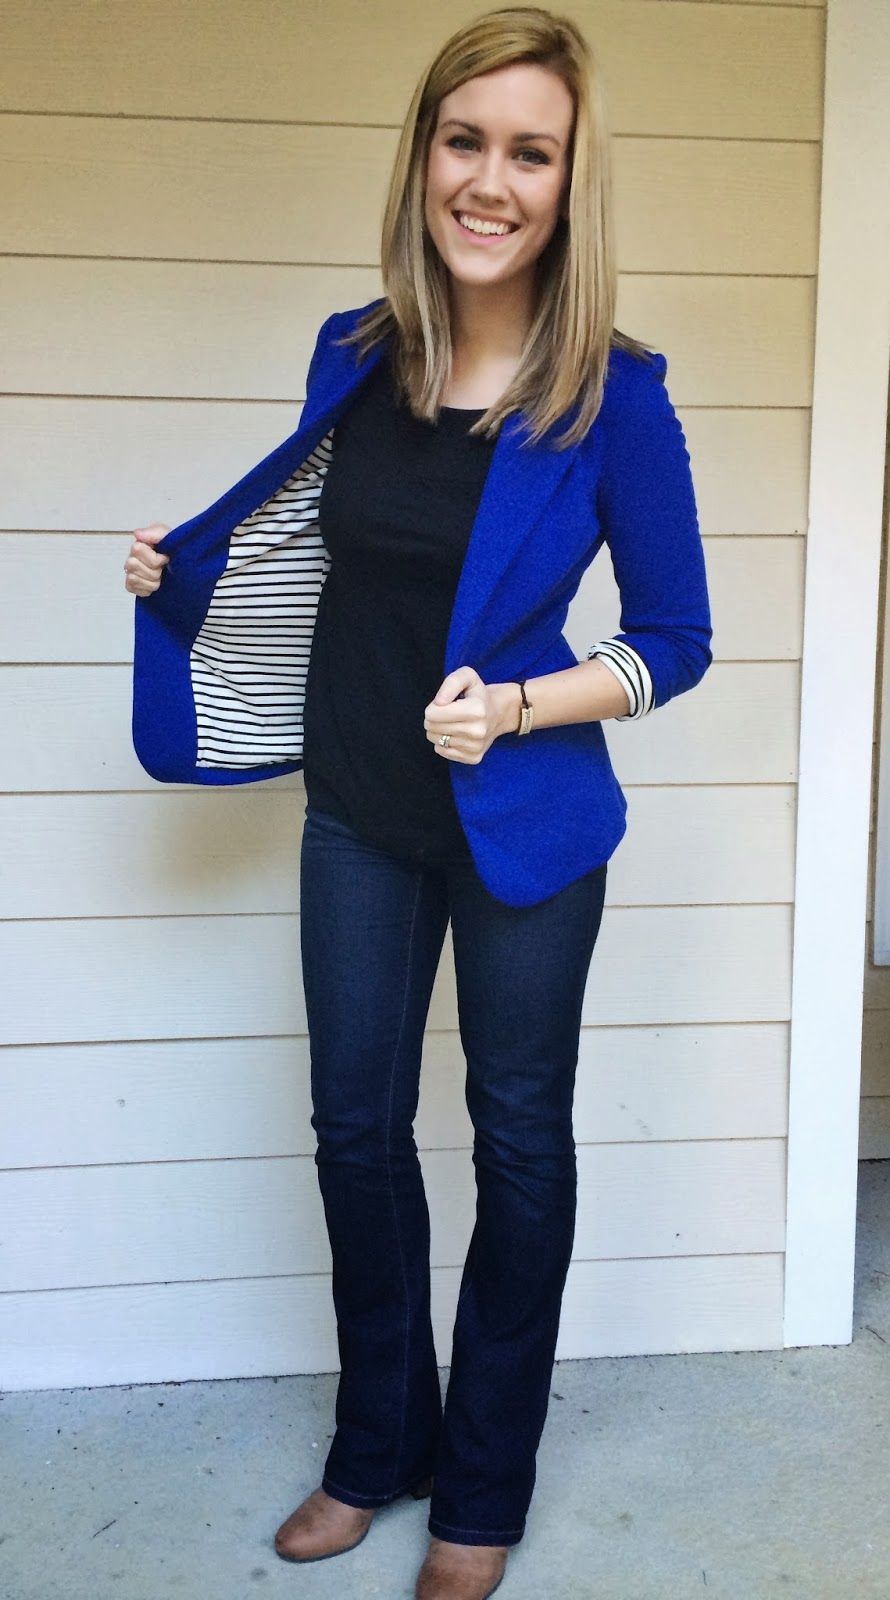 Like this blazer – awesome color and fun. Also LOVE the boot cut jeans (although I’m nowhere near that skinny.